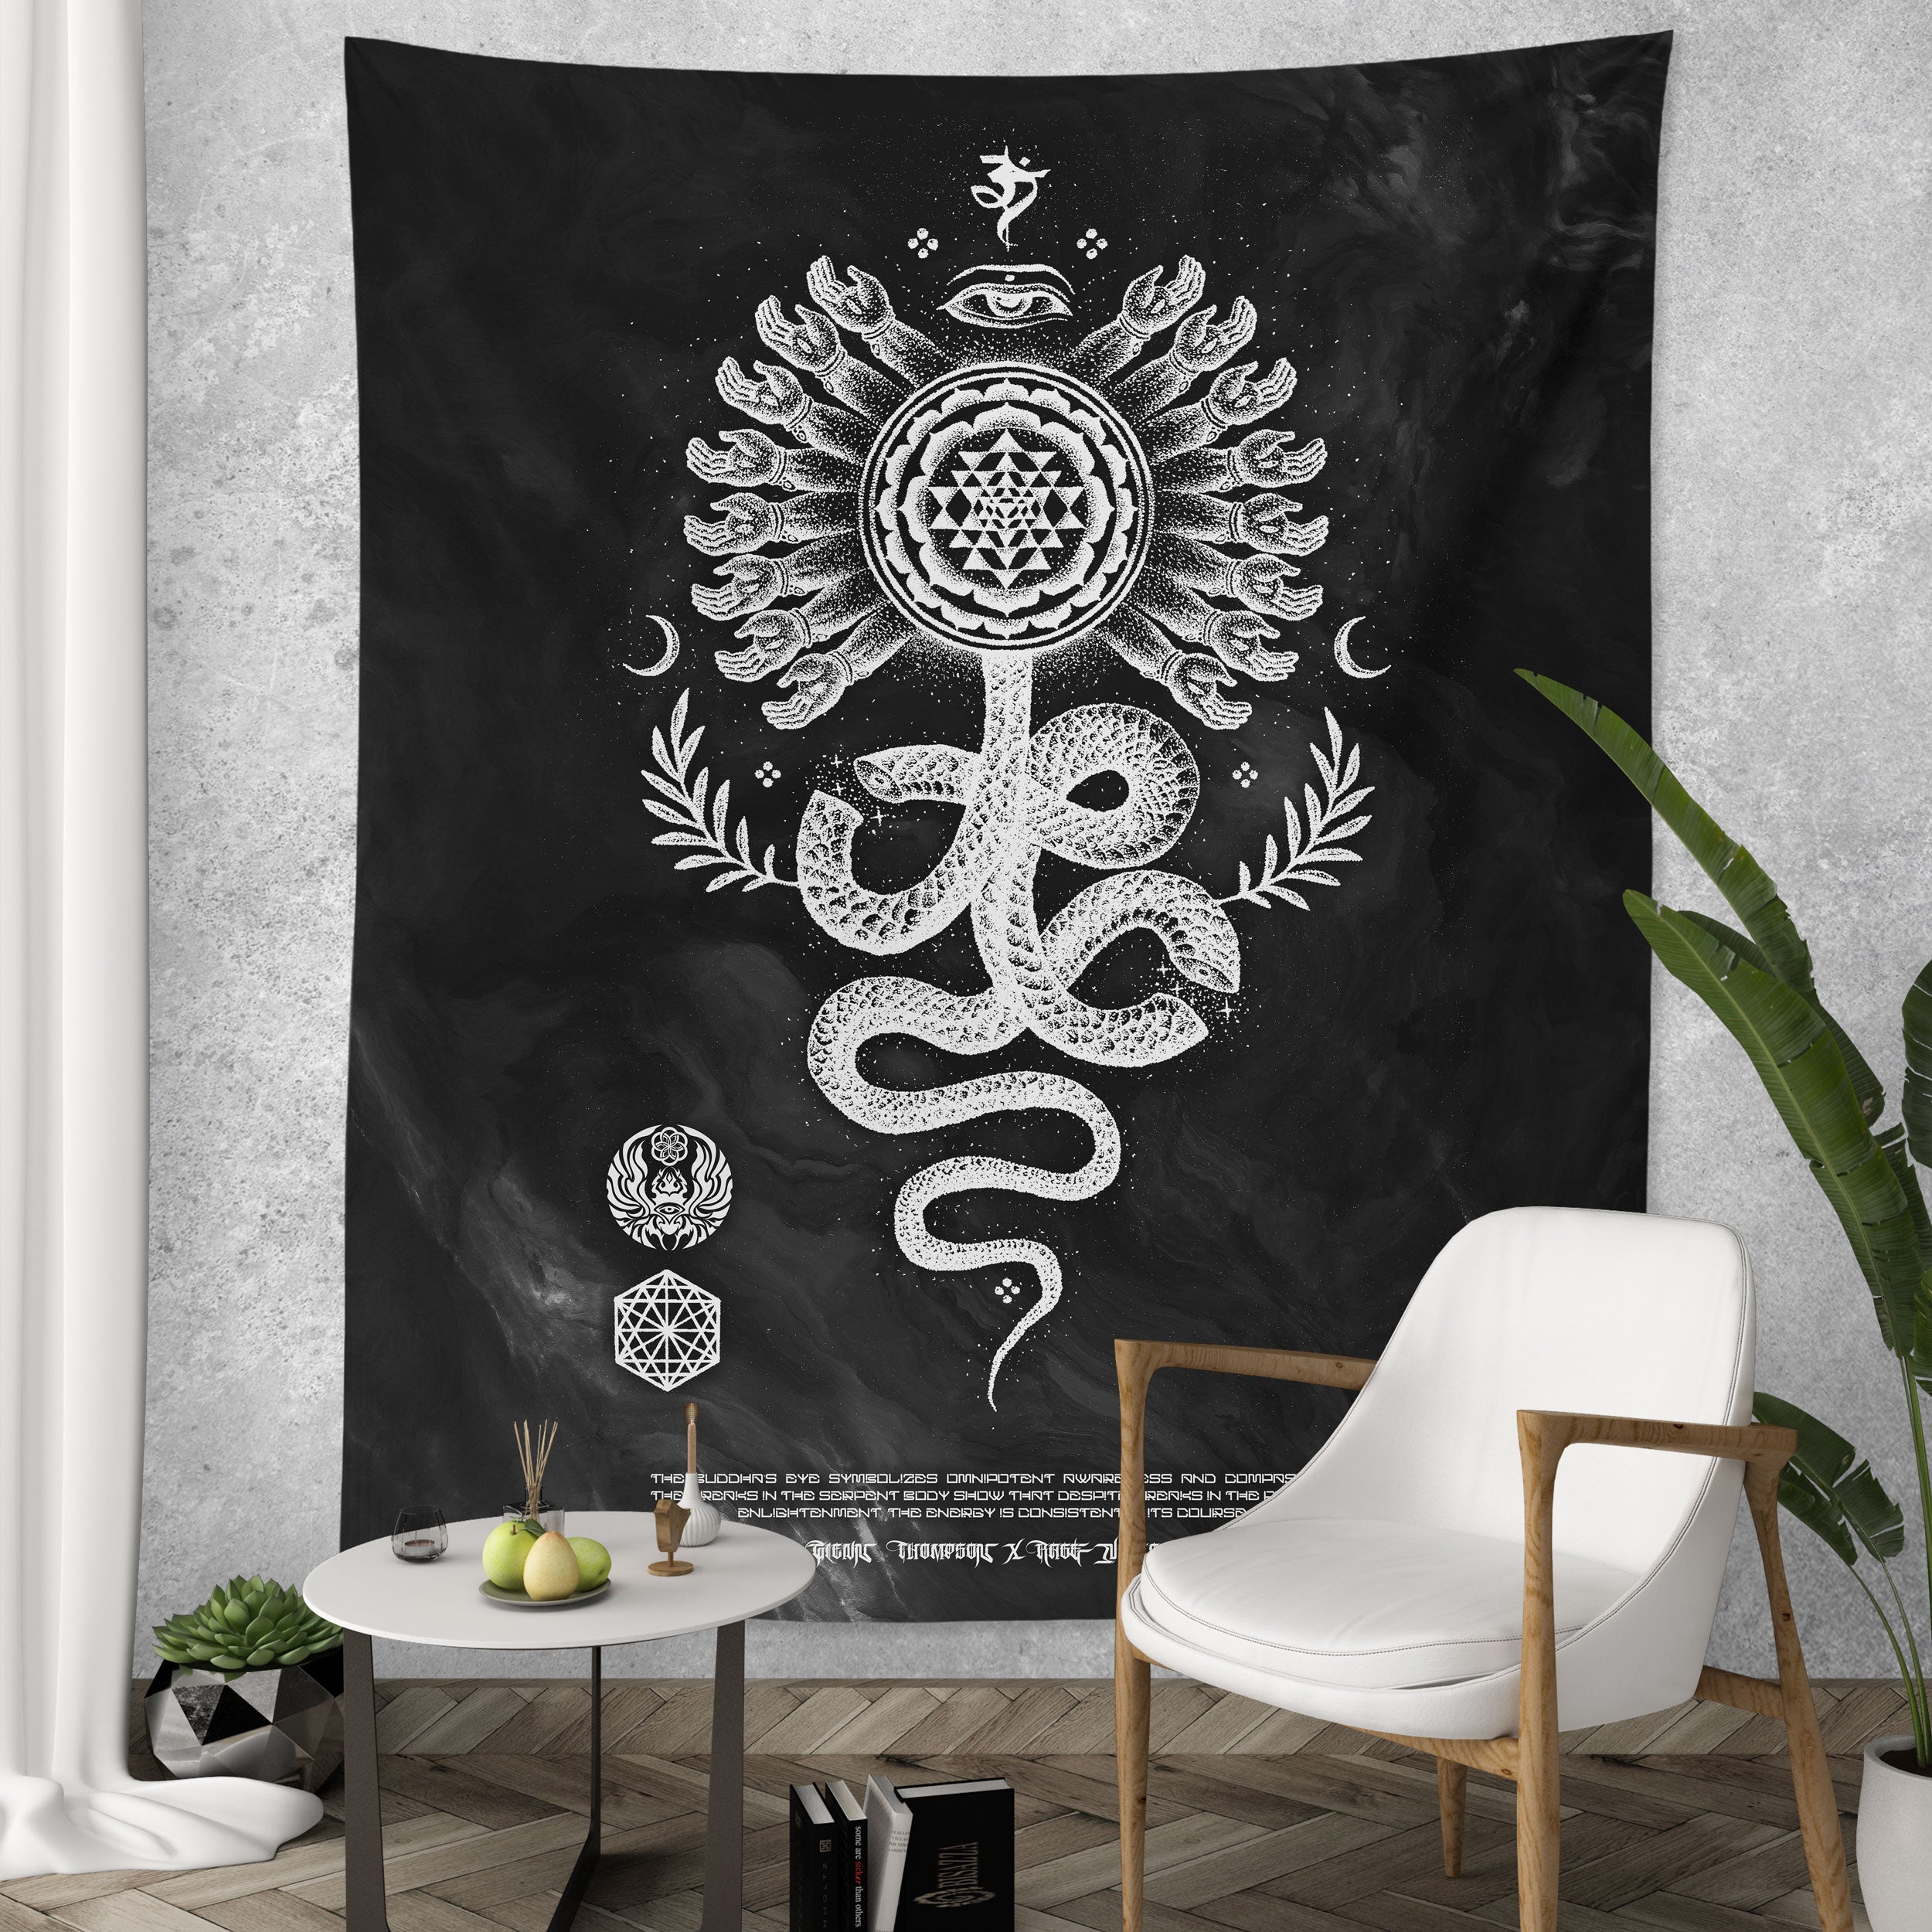 SERPENT INVOCATION • GLENN THOMSON • Limited Edition Wall Tapestry Tapestry 